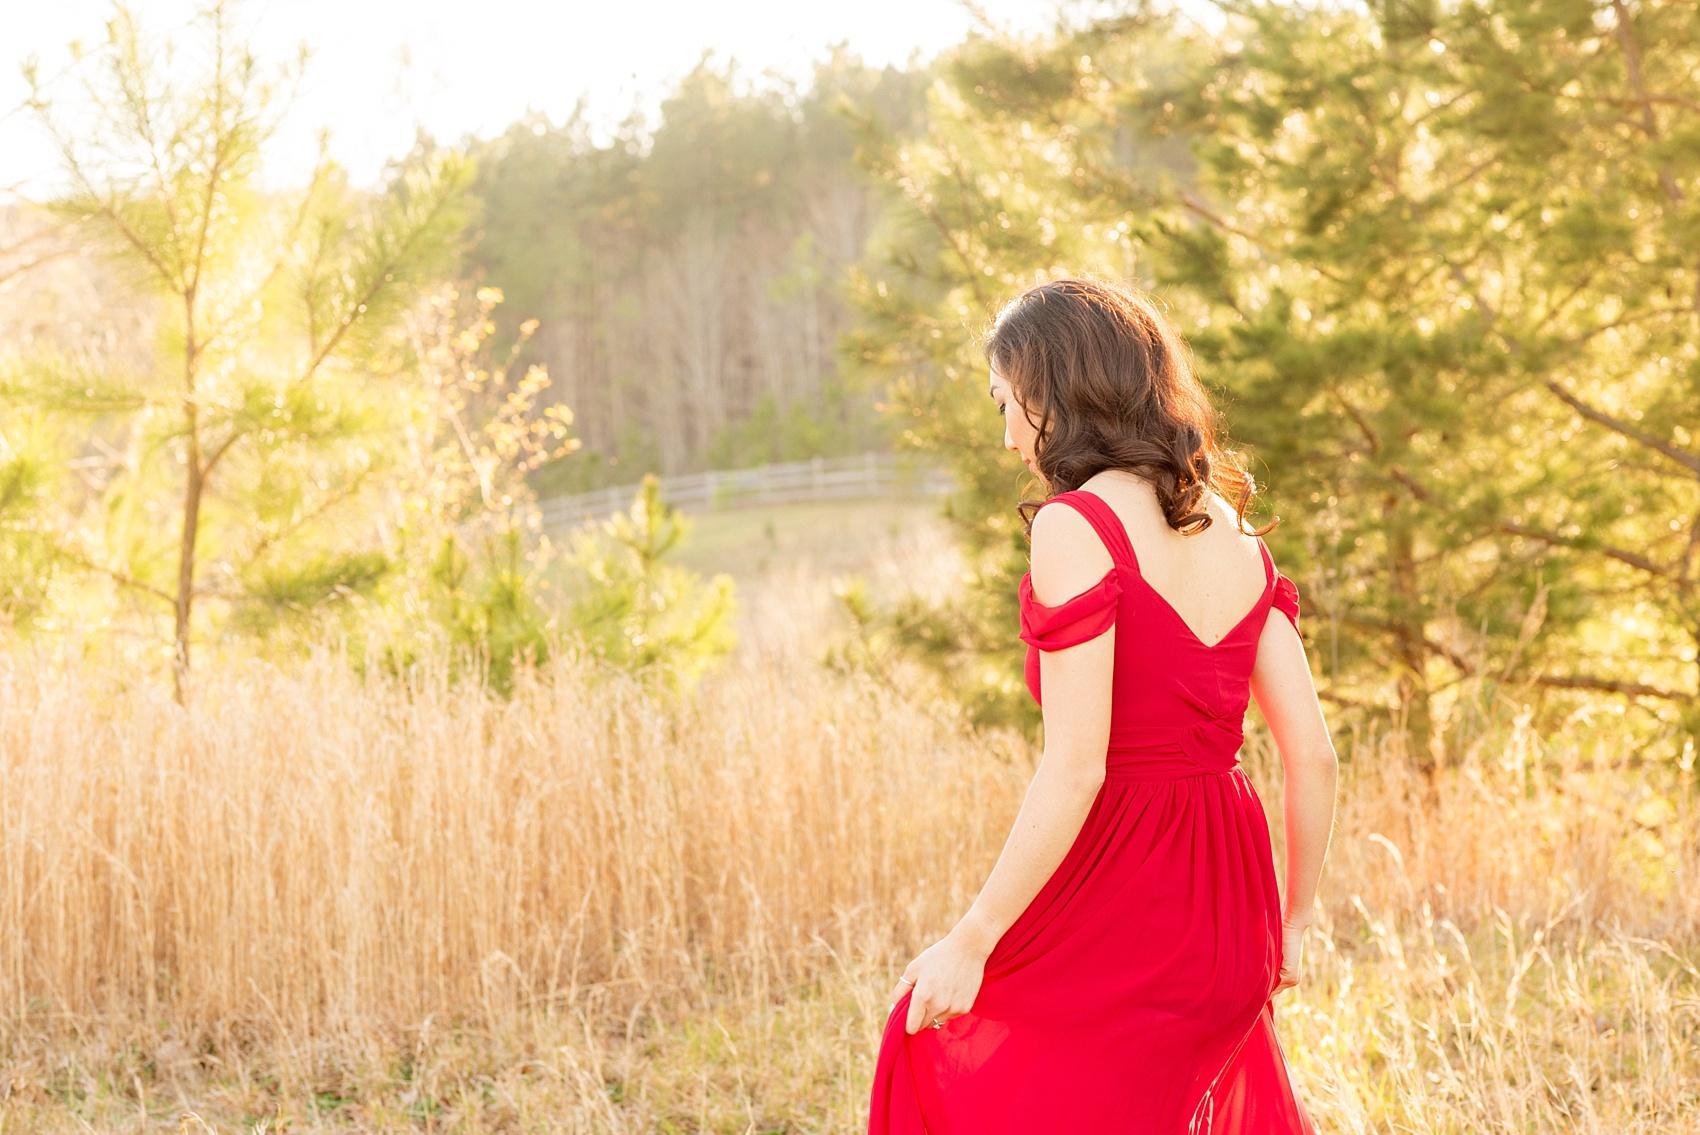 Raleigh engagement photos at Ovation Farm in Sanford by Mikkel Paige Photography. The bride wore a red gown.